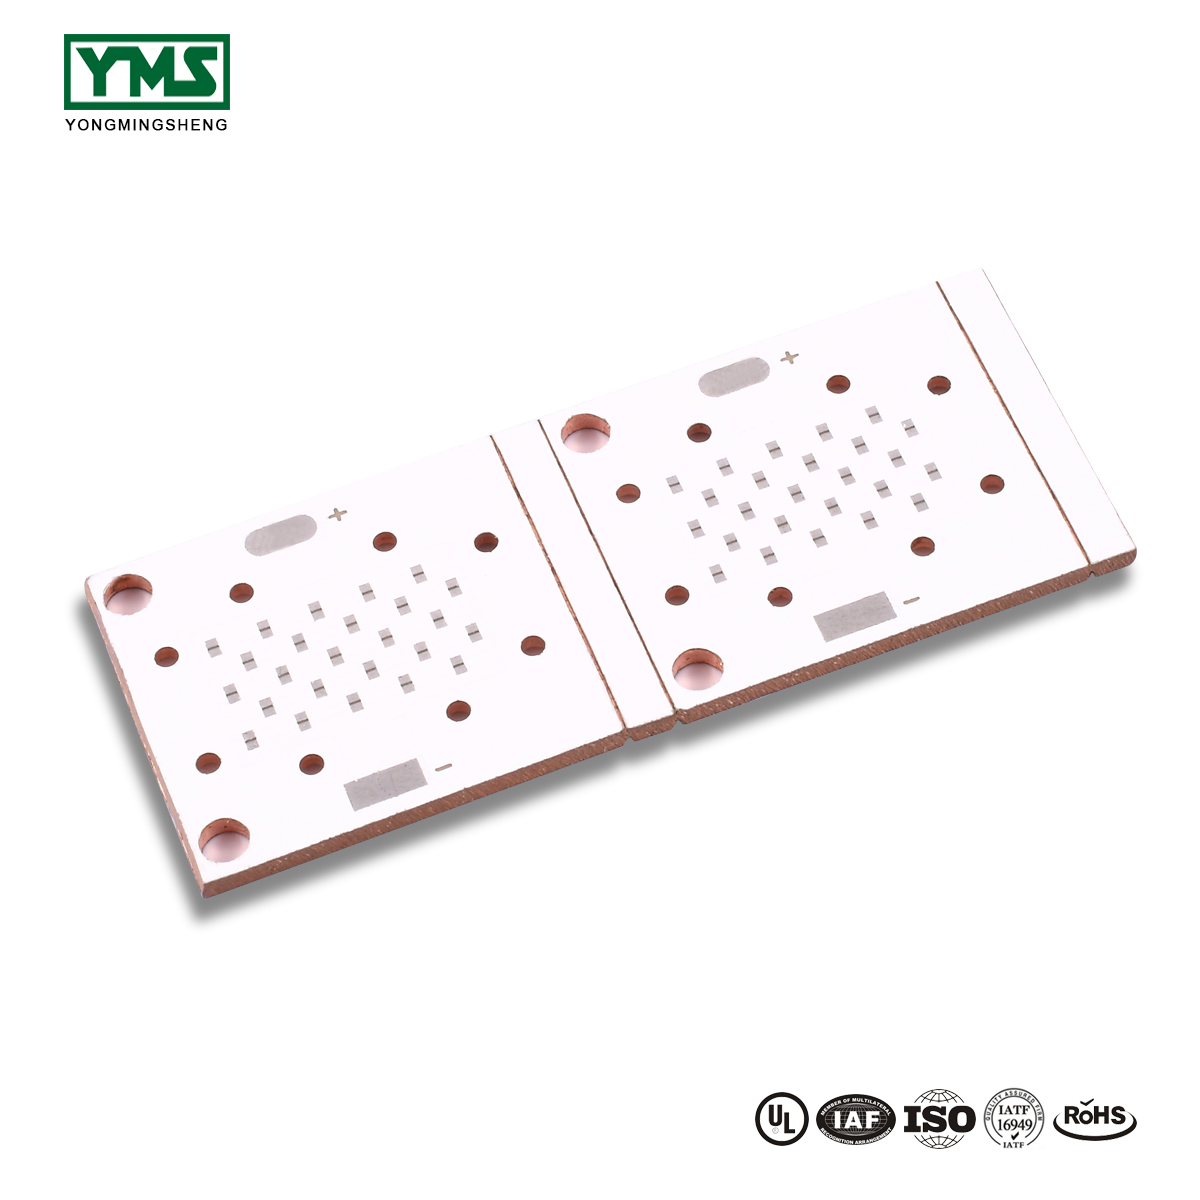 New Fashion Design for 3 Step Hdi Pcb - 1 Layer Thermoelectric Copper base Board | YMSPCB – Yongmingsheng